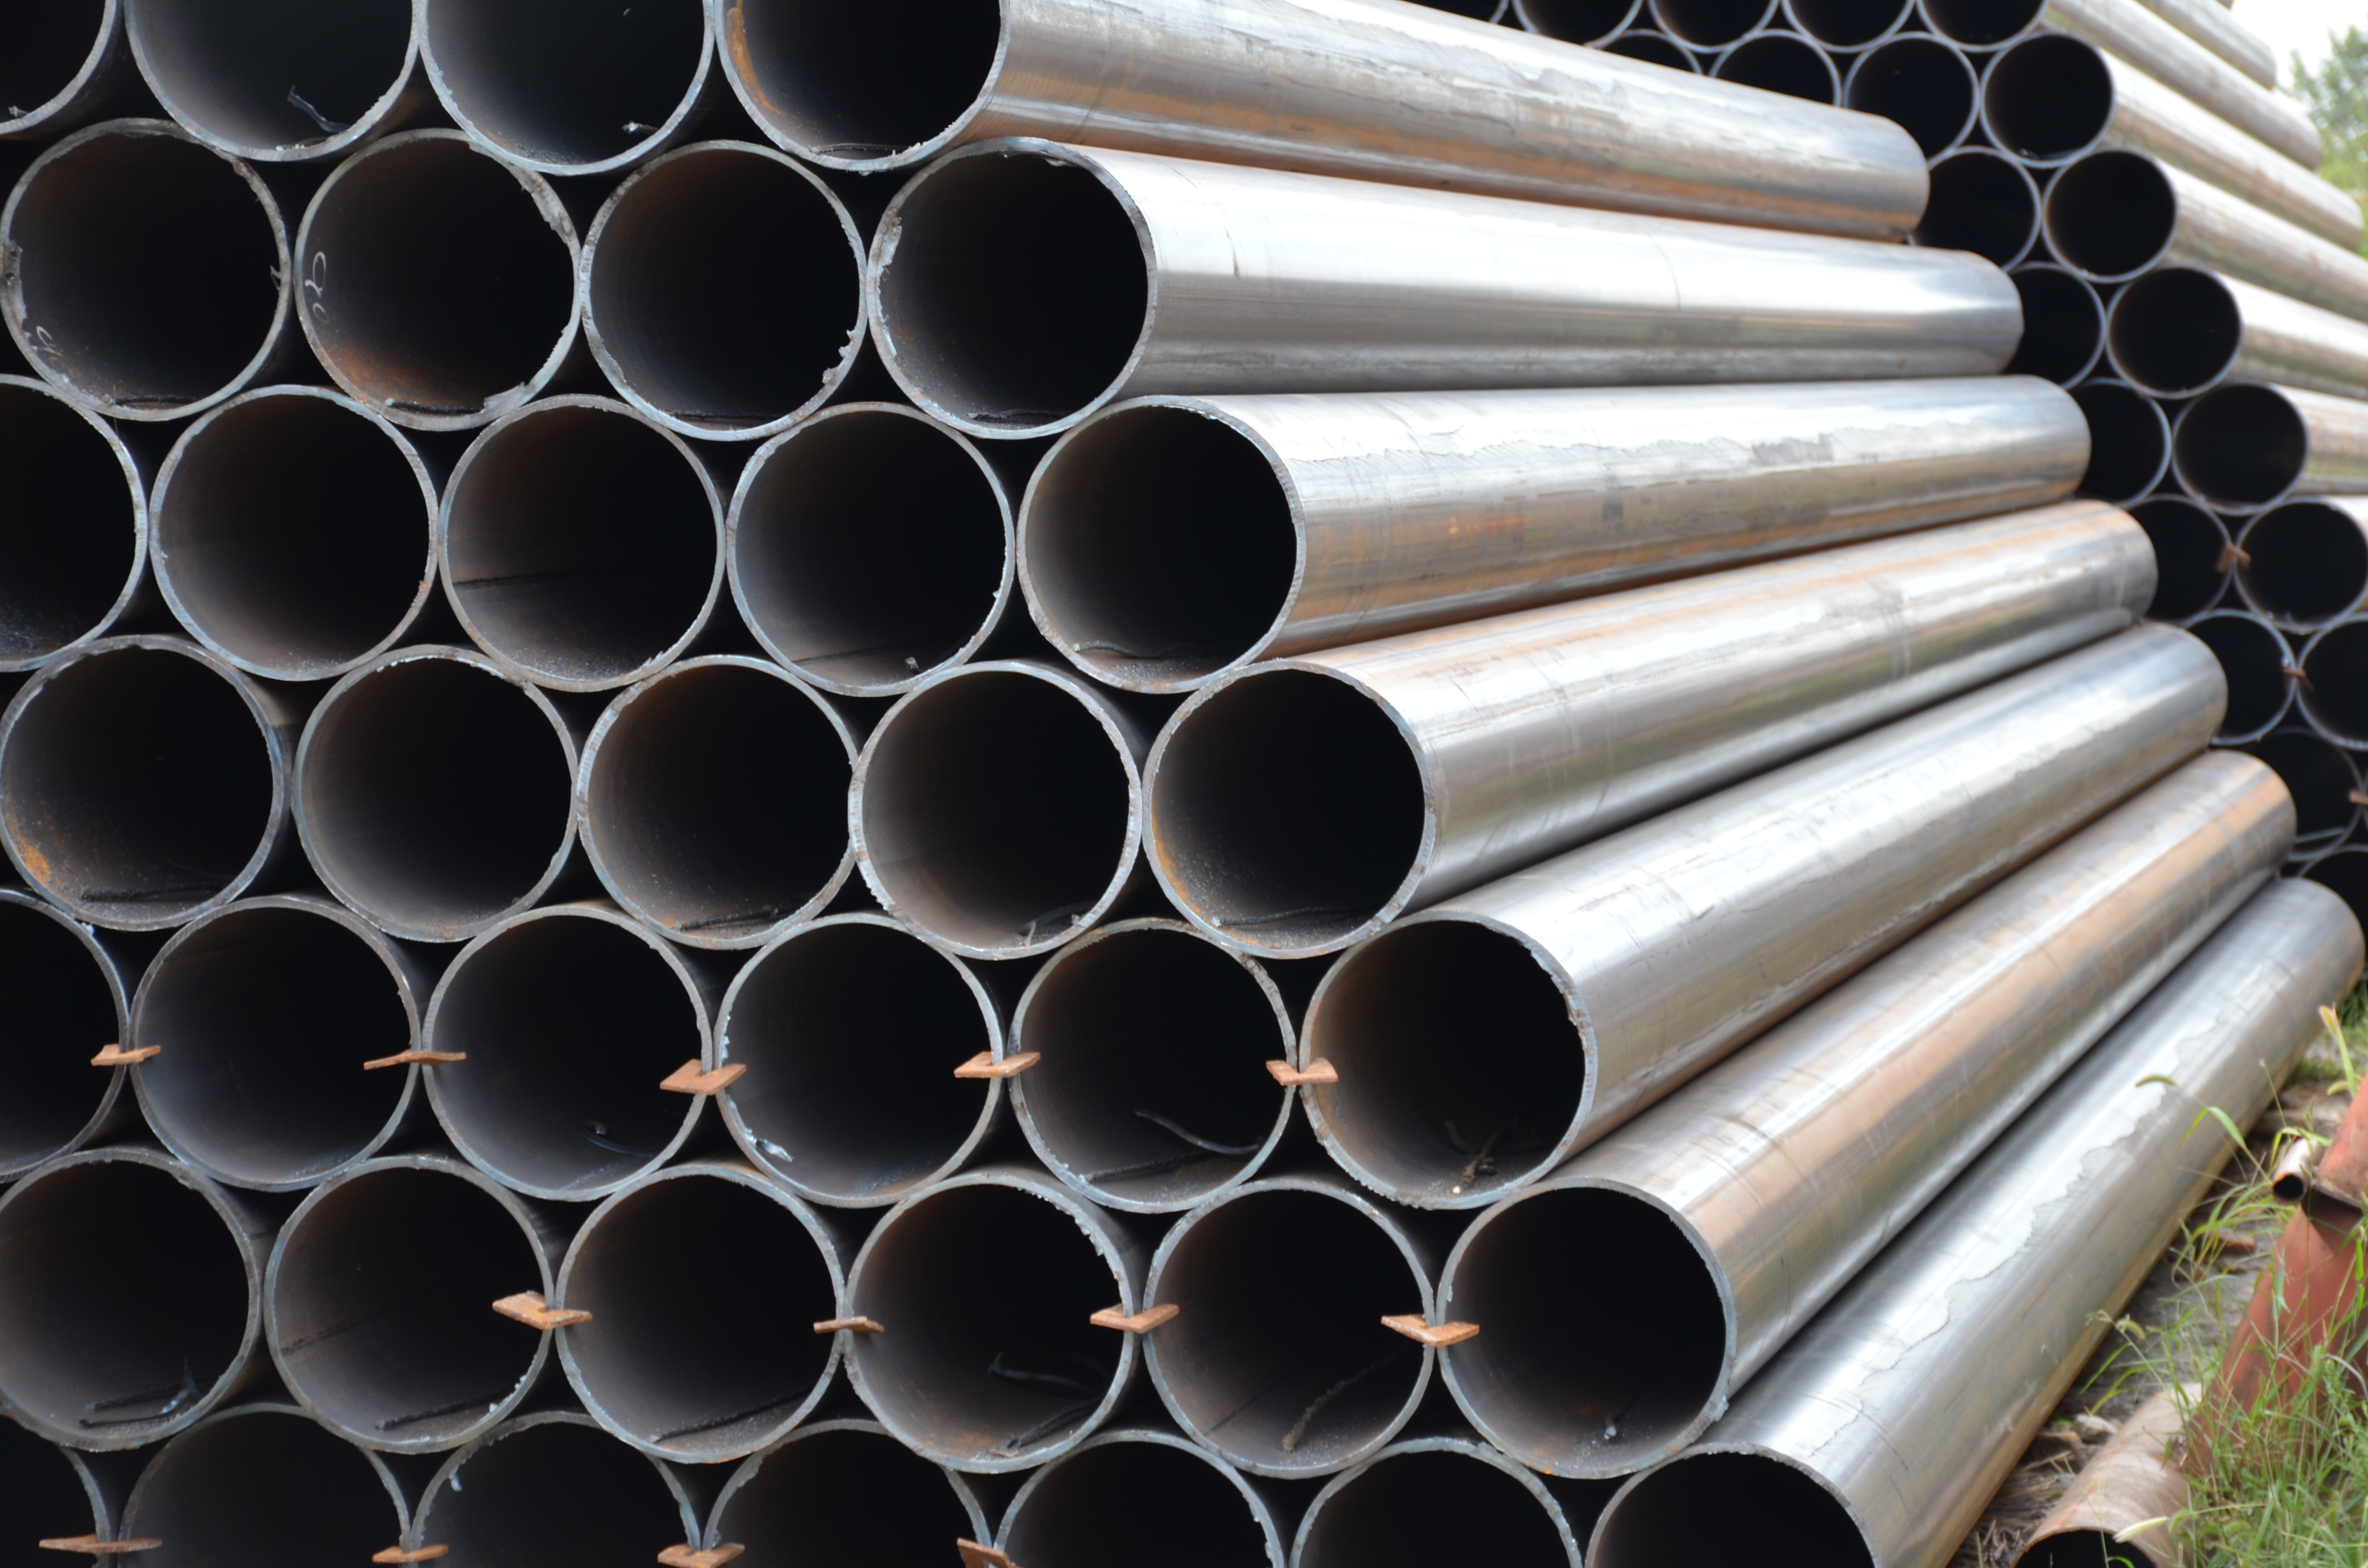 The production process of welded pipe